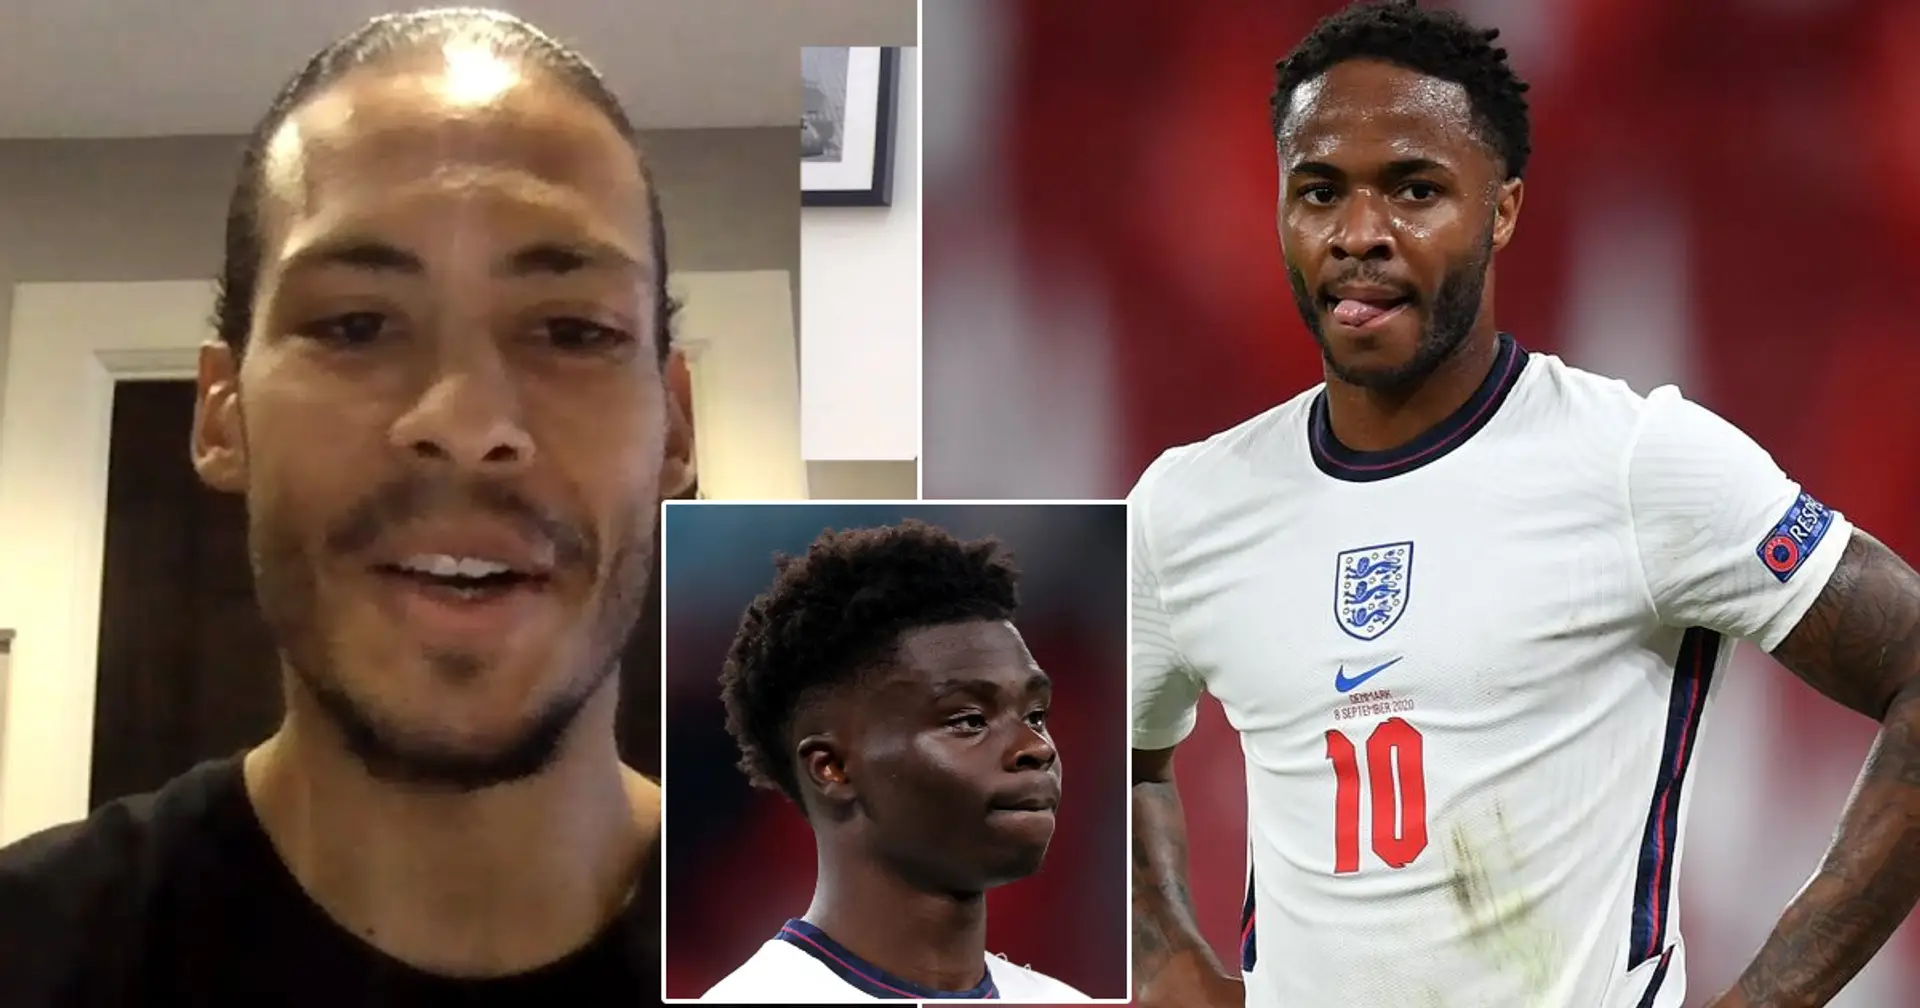 Van Dijk aims subtle dig at Sterling, Southgate for allowing Saka take penalty in Euro final